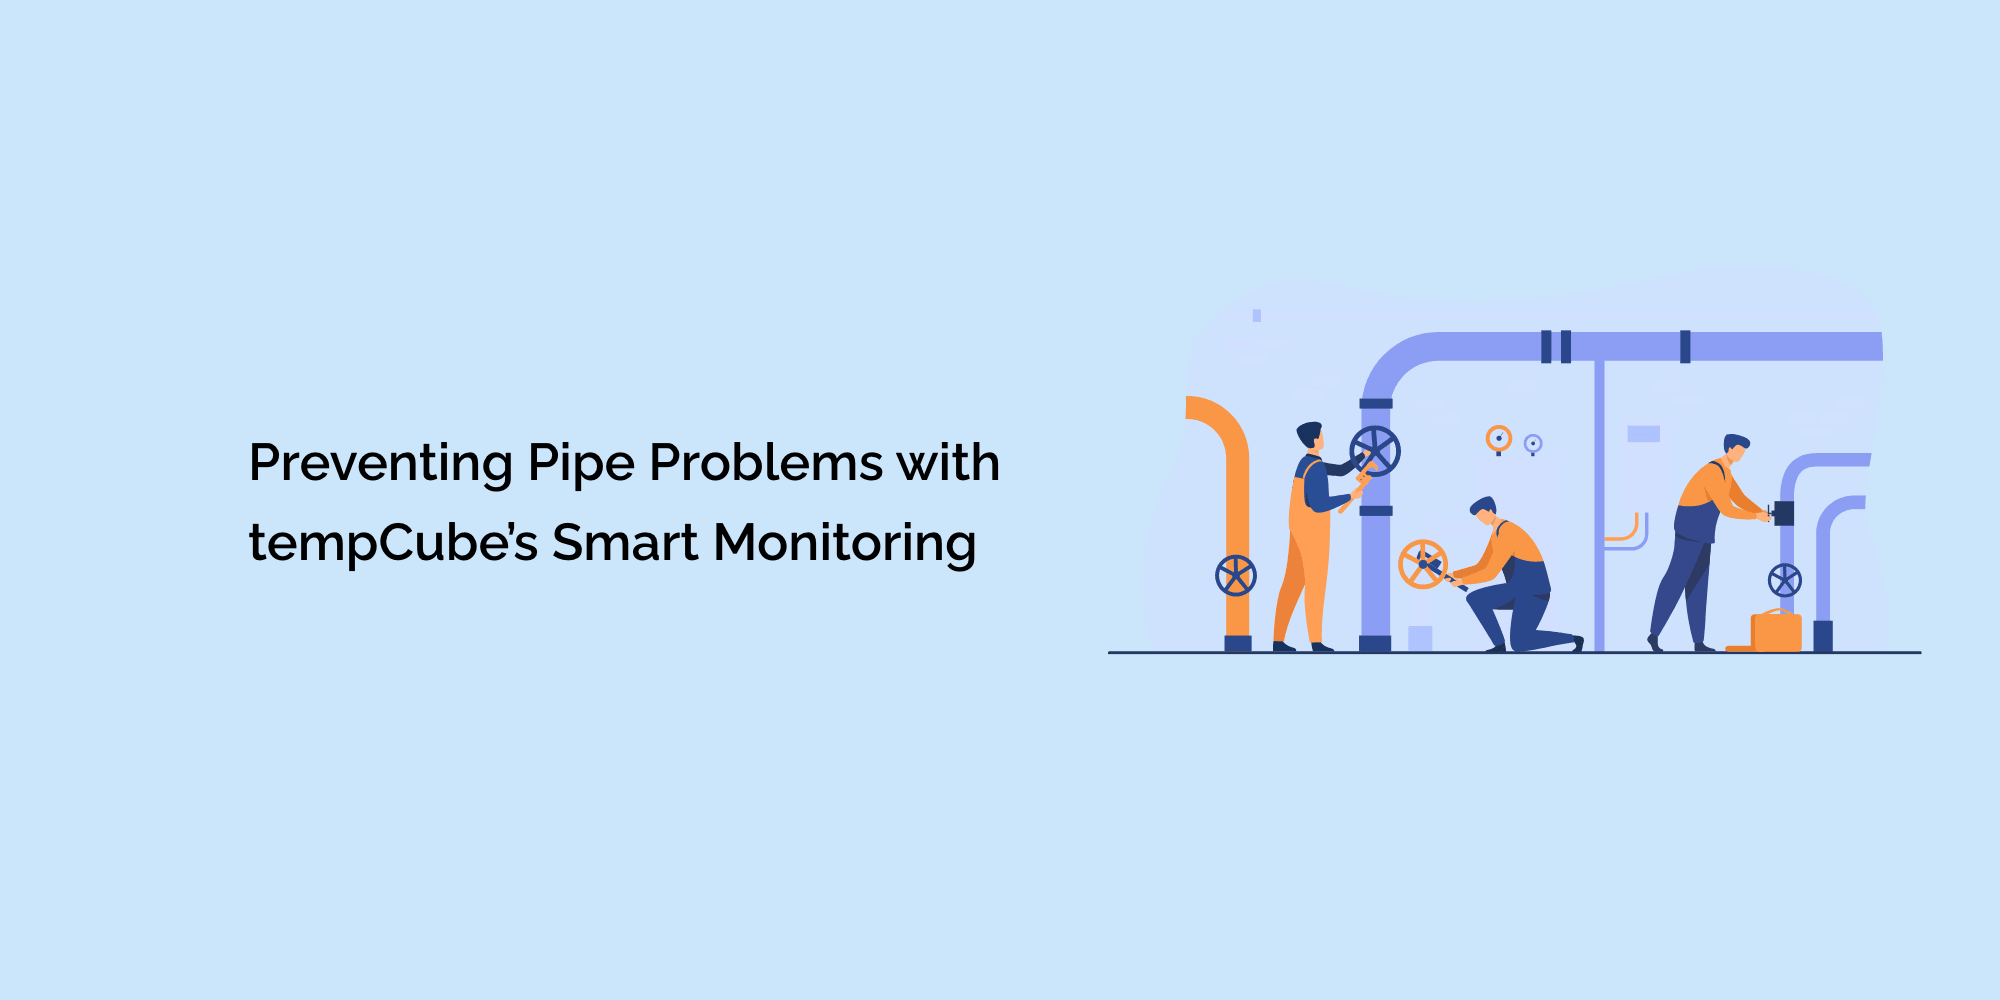 Preventing Pipe Problems with tempCube's Smart Monitoring